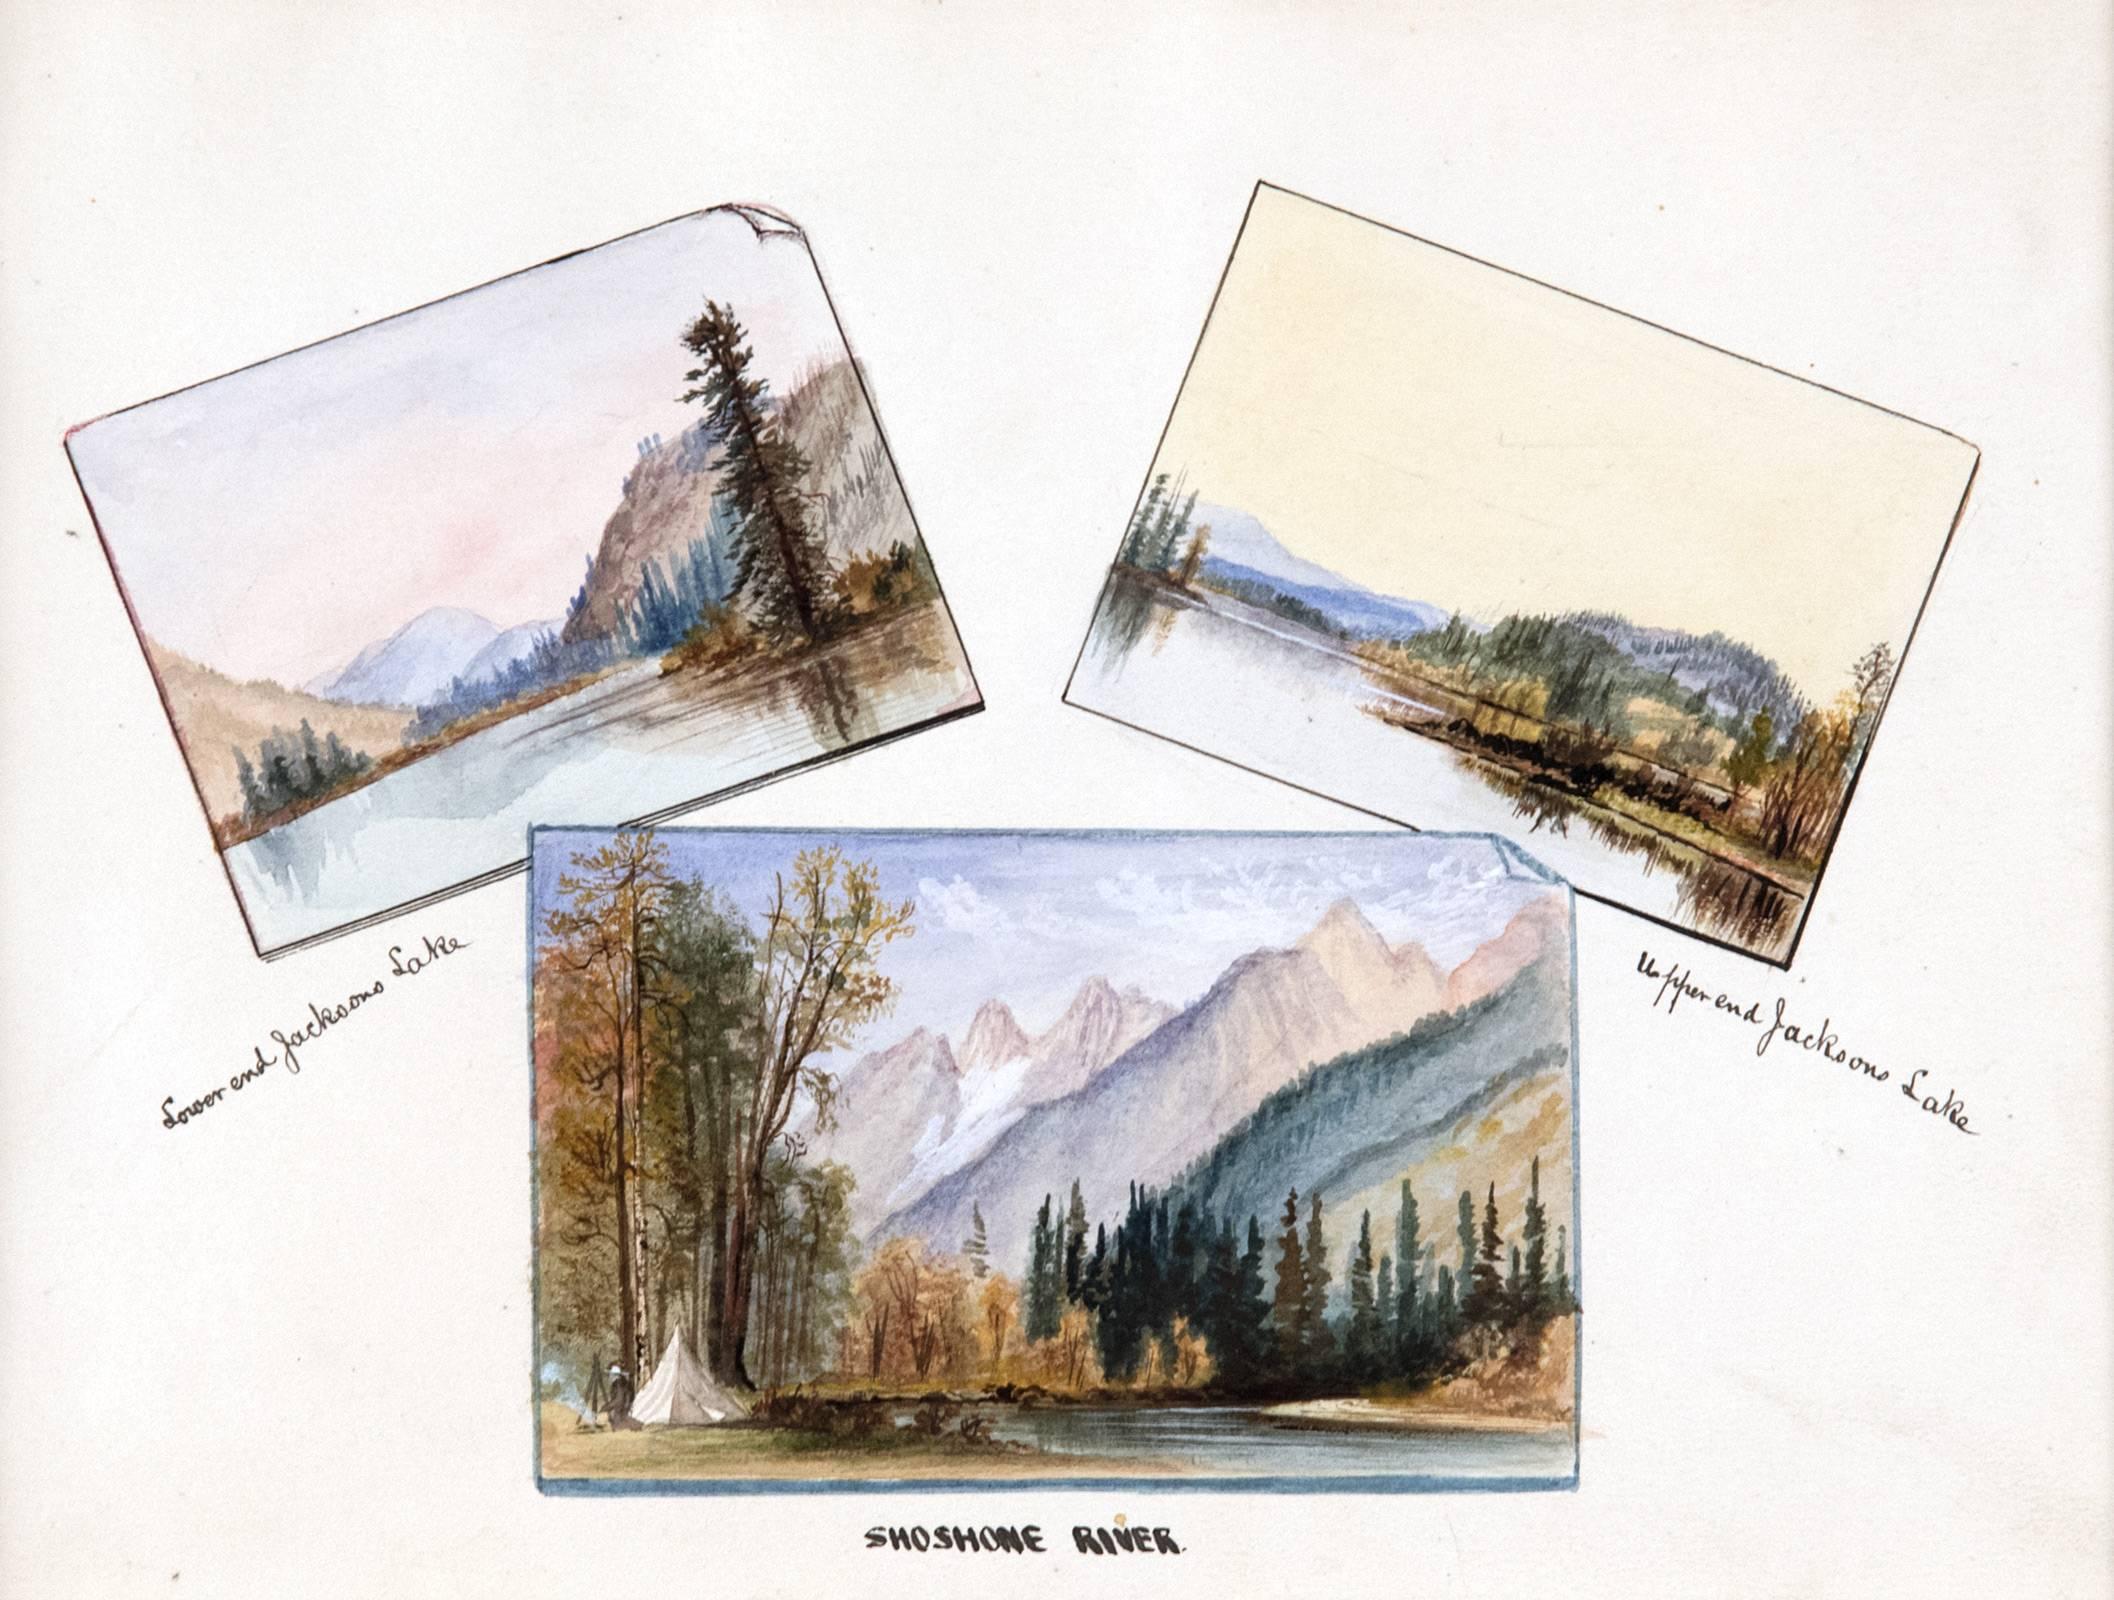 This 19th century work on paper depicts three representations from Jackson Hole, Wyoming: The mountainous view of Lower end Jackson Lake, a golden sky above the view of upper end Jackson Lake and a small camp on the banks of Shoshone River. Beard